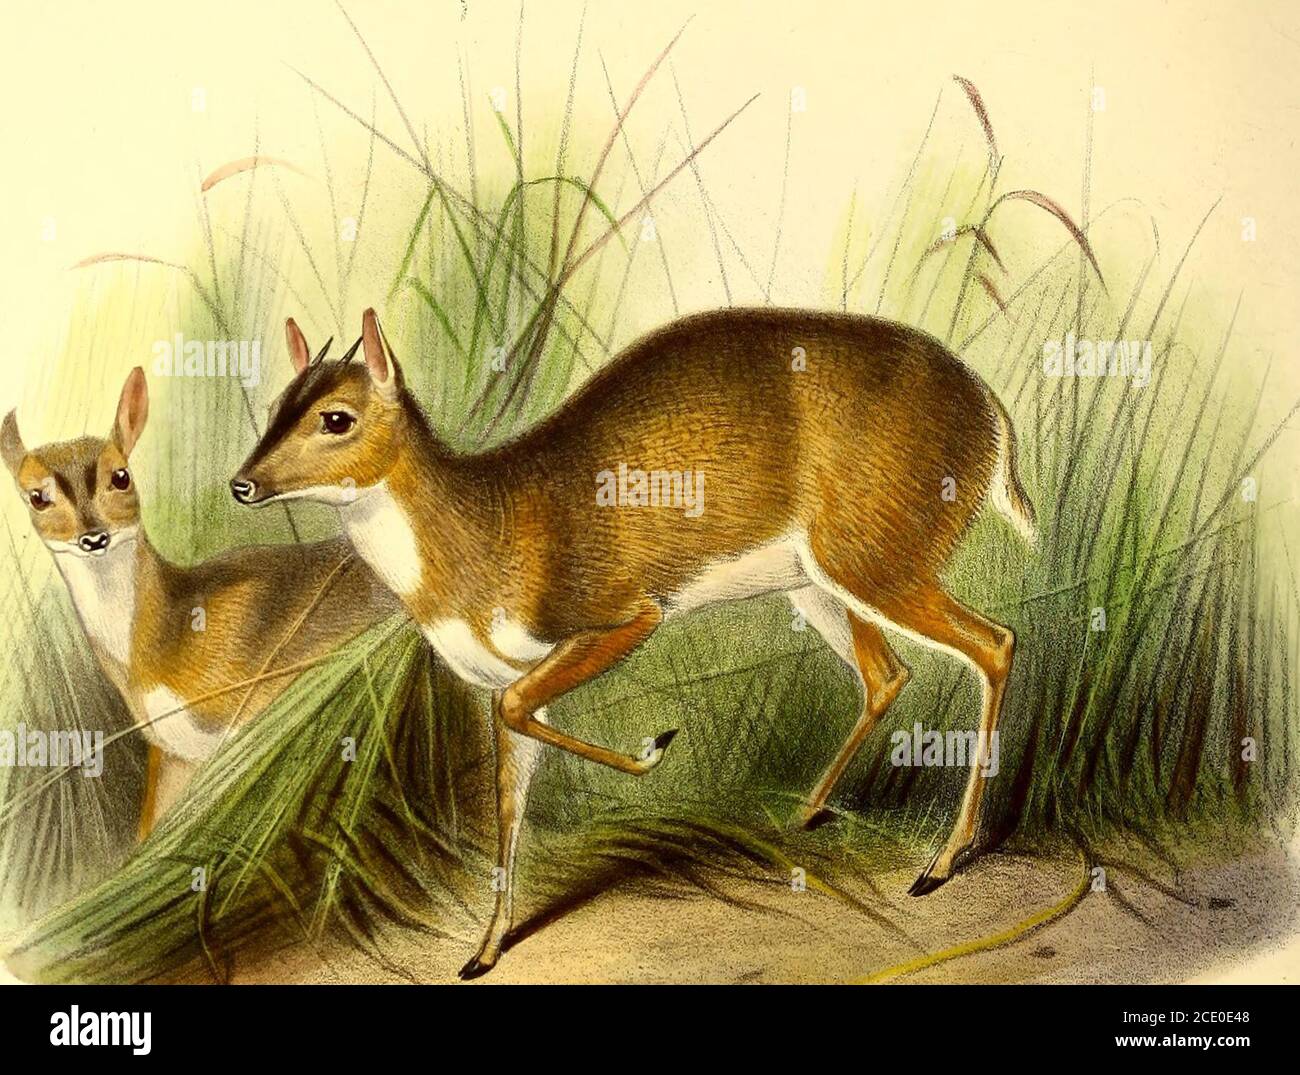 . The book of antelopes . is better to recognize the twospecies as distinct. Dccanber, 1895. 59 Genus V. NEOTRAGUS. Type. Neotragus, H. Sm. GriflF. An. K. v. p. 349 (1827) N, pygm^us. Tragulus, Ogilb. P. Z. S. 1836, p. 138 [nee Pall.) N. PYGMiEus. Minyiragus, Glog. Naturg. p. 154 (1841) N. pygm^us. Spinigera, Less. N. Tabl. R. A., Mamm. p. 178 (1842) N. pygm^us. Nanotragus, Sxind. Pecora^ K. Vet.-Ak. Handl. 1844, p. 191 (1846) . N. pygm^us. Size very small. No auricular glands nor accessory hoofs. Tail of medianlength. Skull with its muzzle unusually well ossified, so that there are no ante-or Stock Photo